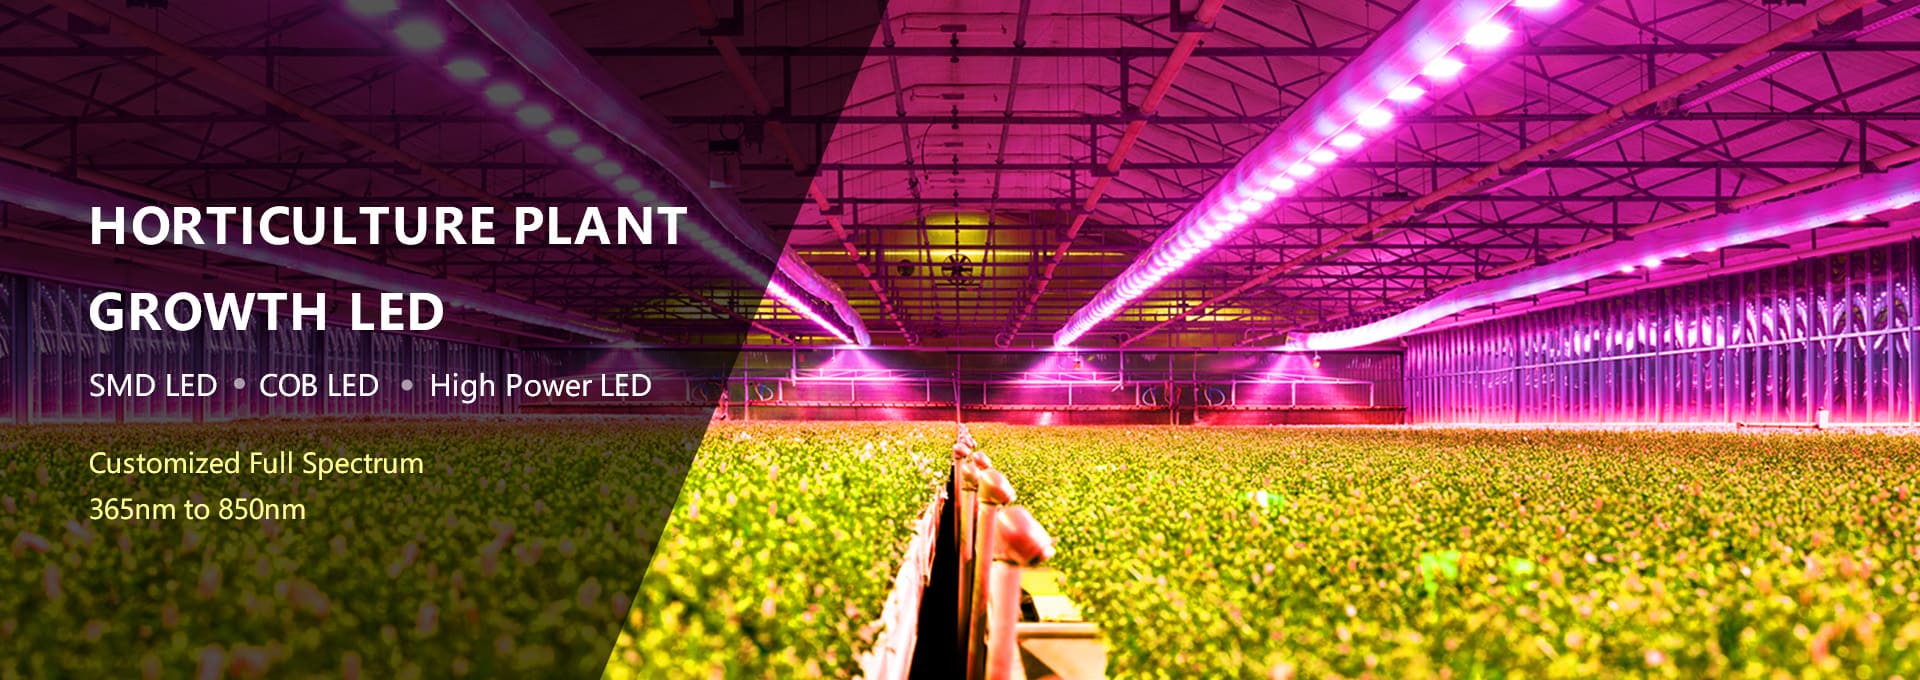 blog Banner horticulture plant growth led